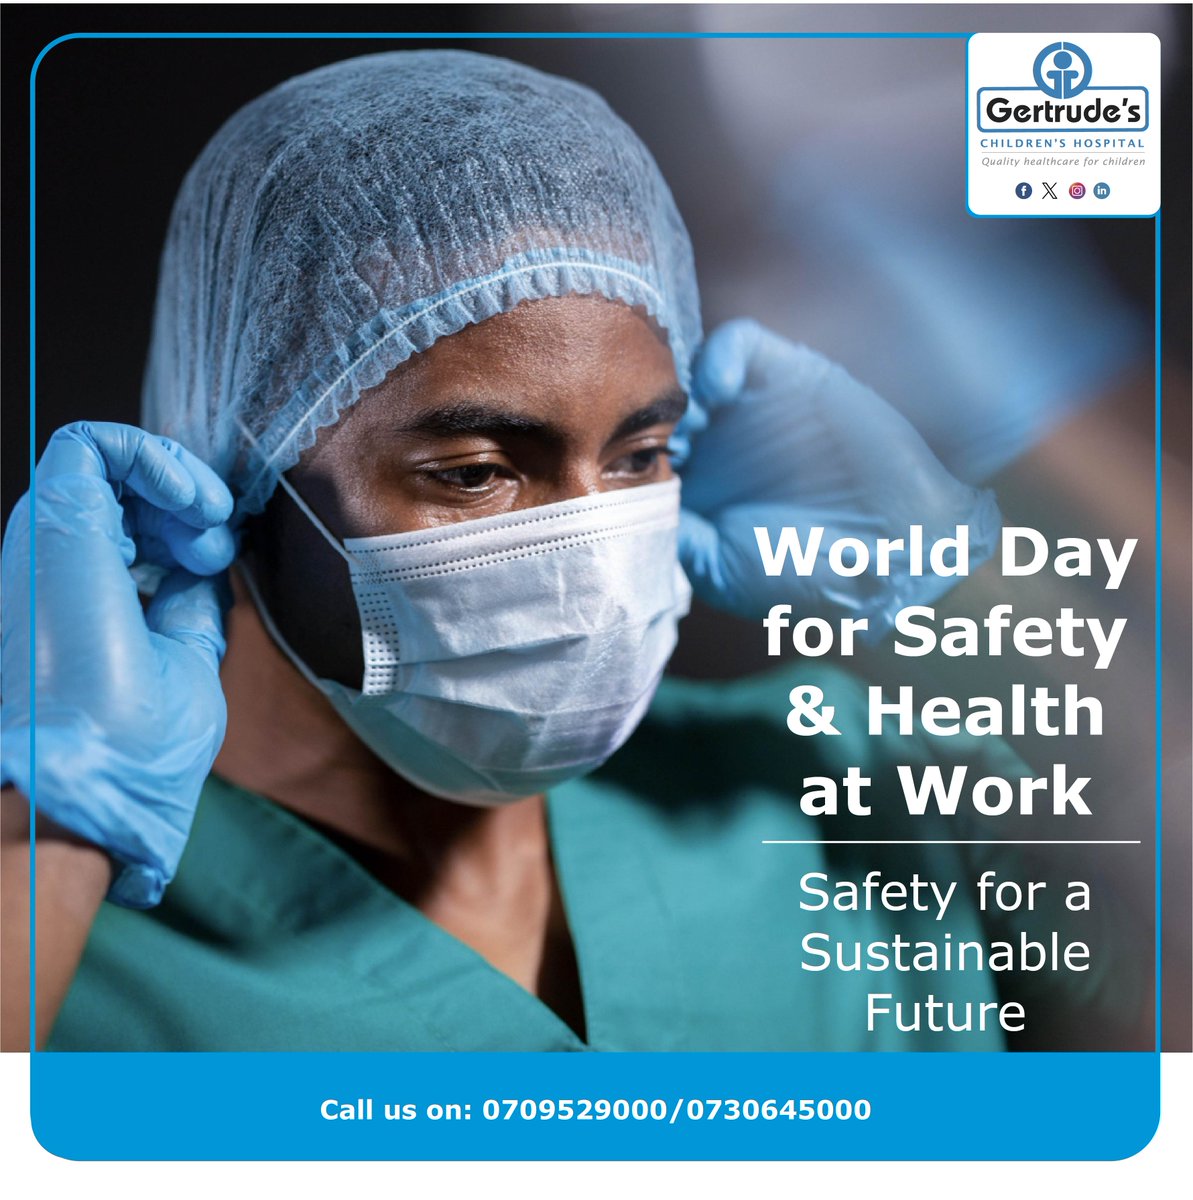 Workplace safety is everyone's responsibility. On this day, let's prioritize safety and health at work, ensuring every worker has a safe and healthy environment to thrive. Call 0709529000. #GertrudesKe #SafeWorkplaces #HealthAtWork